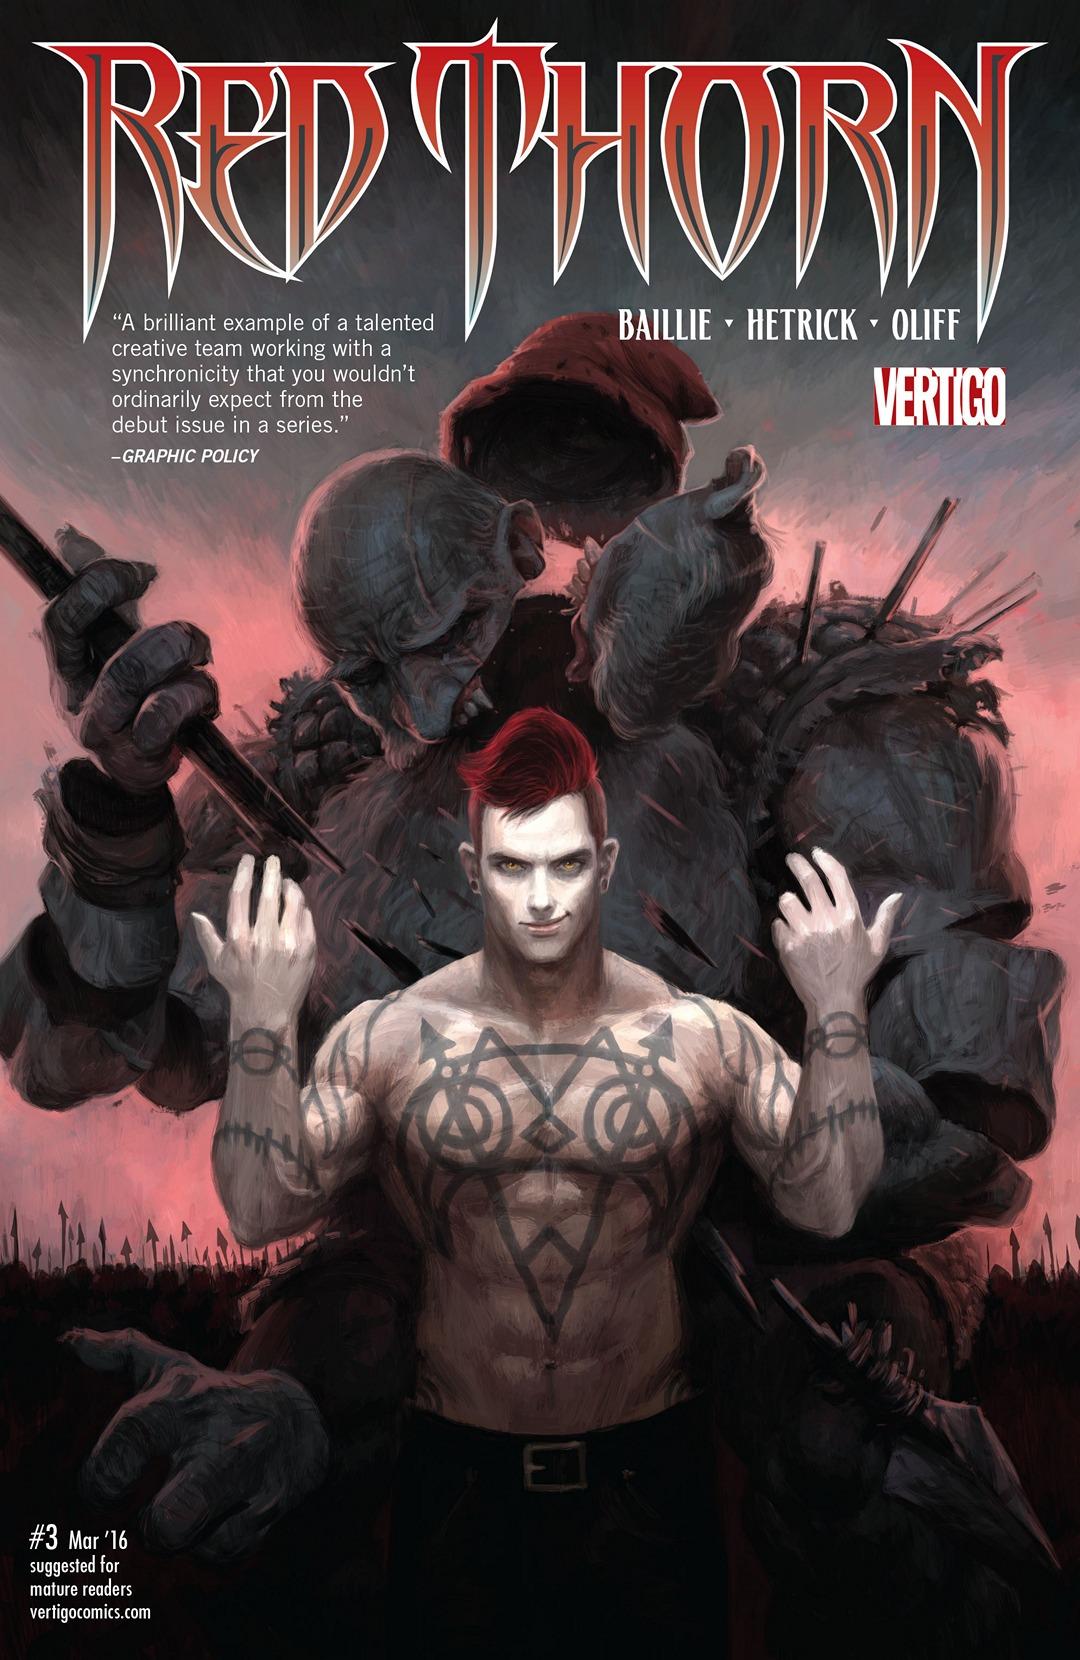 Red Thorn Vol. 1 #3